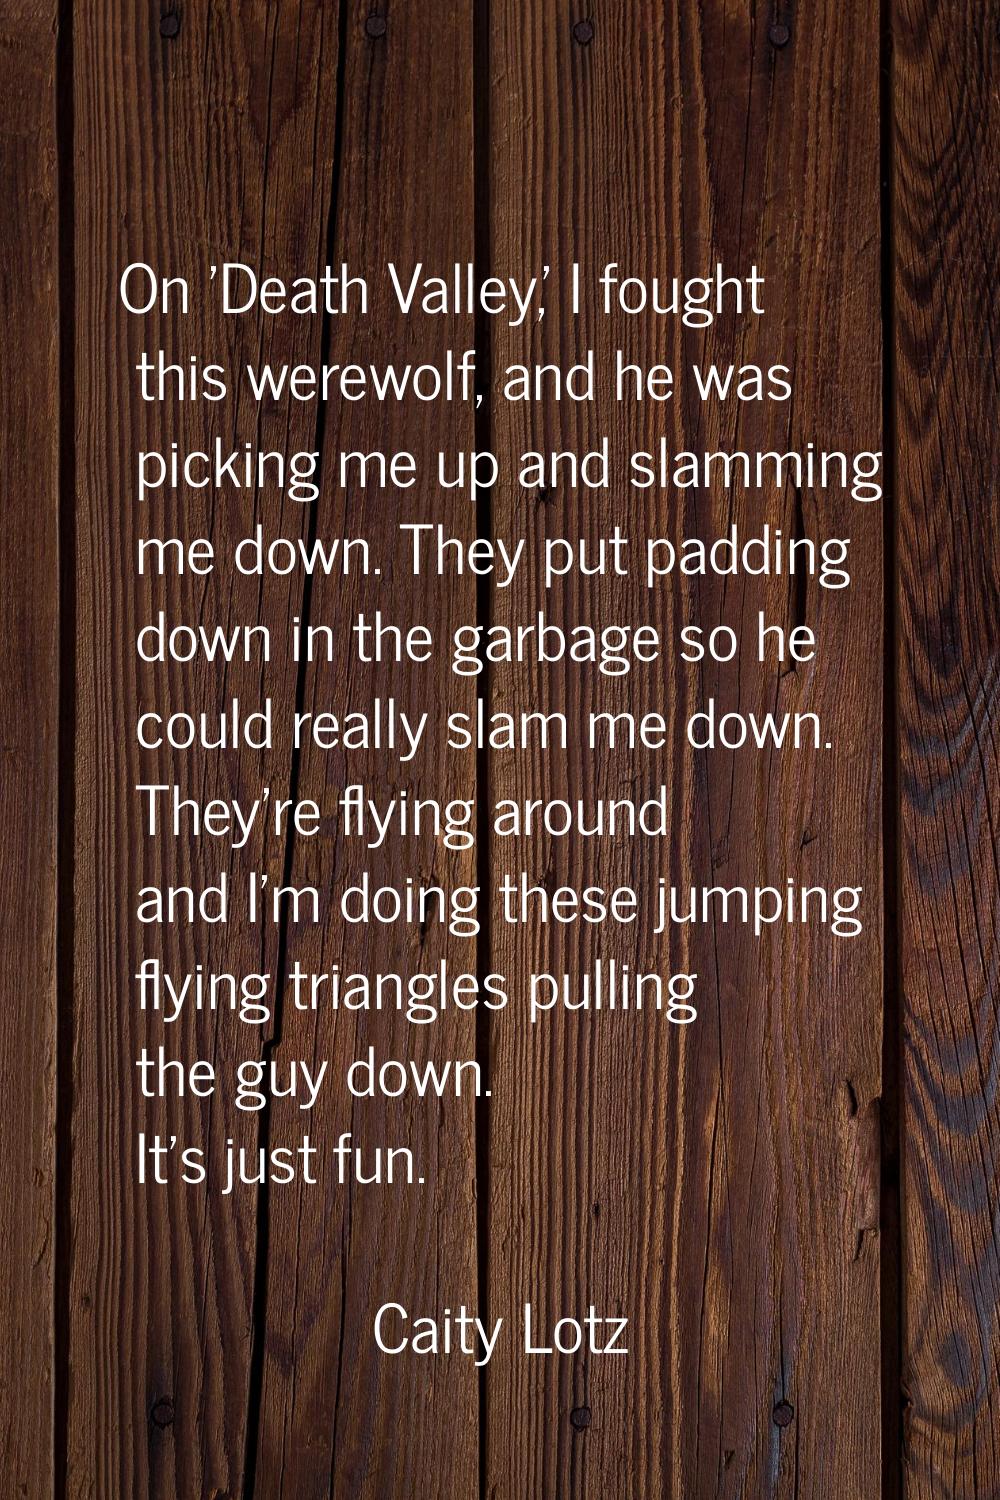 On 'Death Valley,' I fought this werewolf, and he was picking me up and slamming me down. They put 